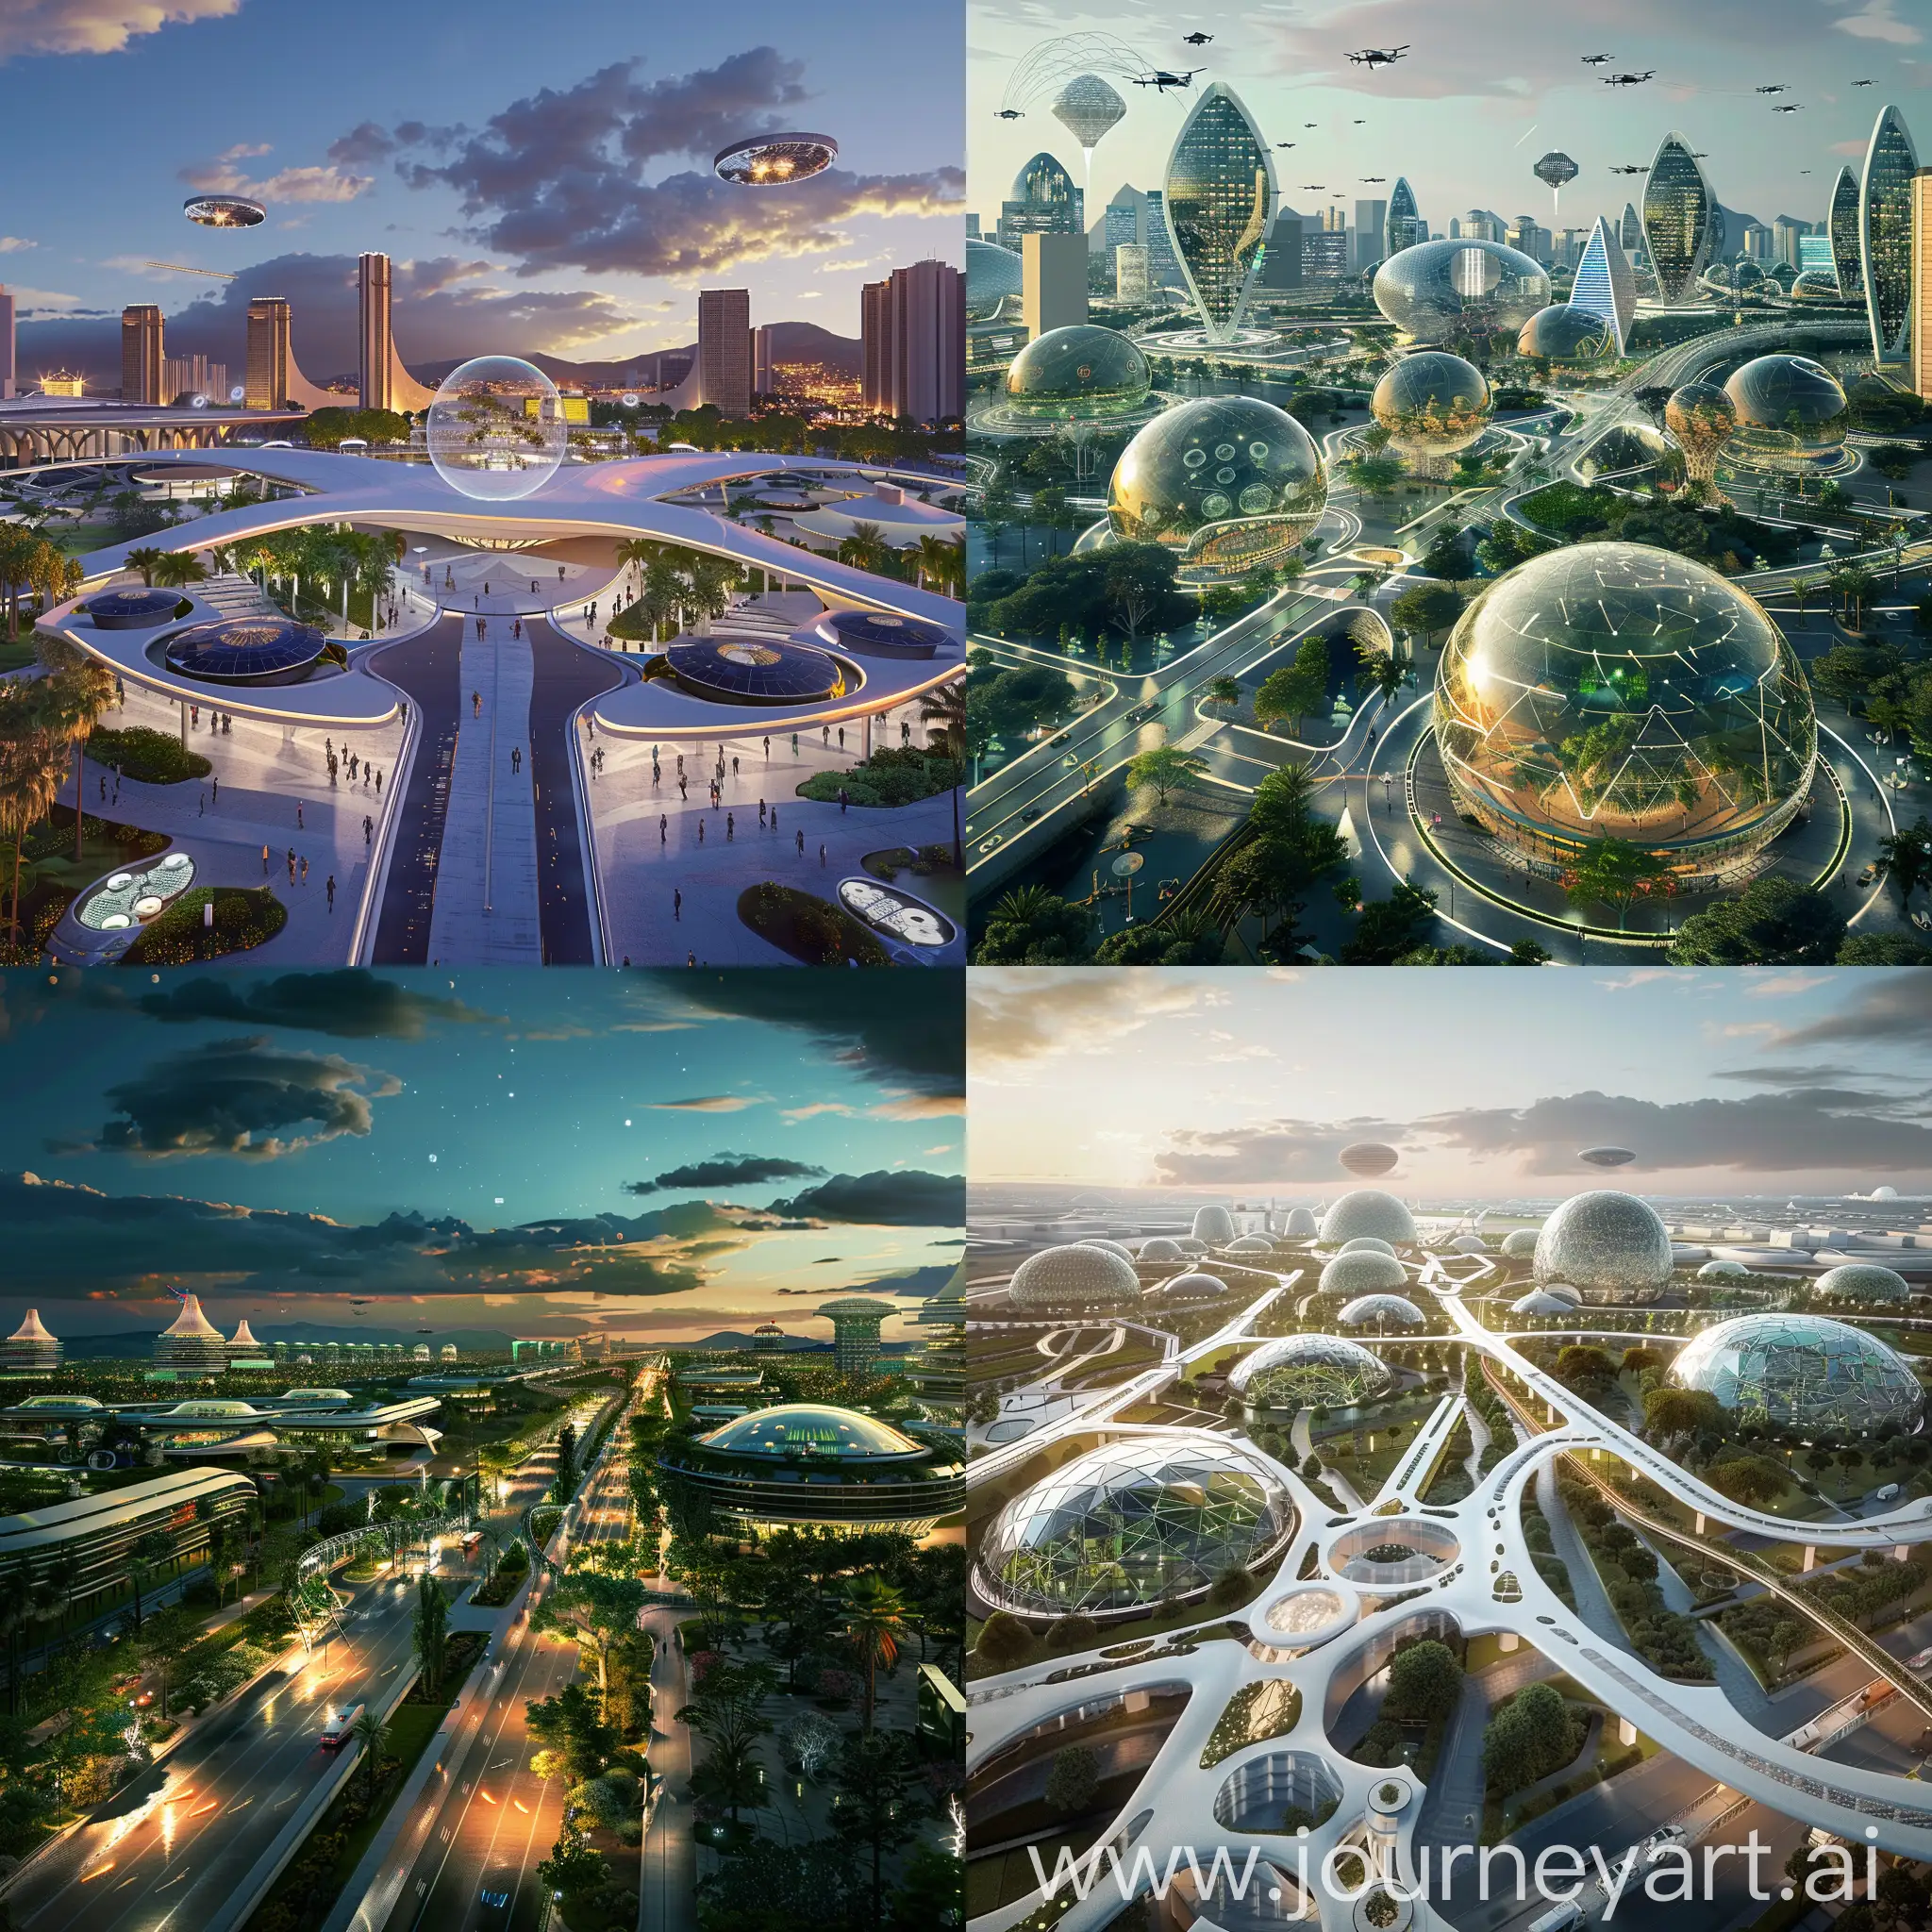 Sci-Fi Brasilia, Advanced Science and Technology, Advanced, Smart Grids, Water Reclamation Systems, Vertical Farms, Waste-to-Energy Plants, Autonomous Public Transport, Green Buildings, Urban Air Mobility Platforms, Responsive Roadways, AI-Powered Surveillance, Quantum Computing Centers, Dynamic Facades, Drone Delivery Hubs, Solar Roadways, Atmospheric Water Generators, Kinetic Energy Harvesters, Elevated Greenways, Interactive Public Art, Light Pollution Control Systems, Bio-reactive Billboards, Climate Resilience Barriers, In Unreal Engine 5 Style --stylize 1000